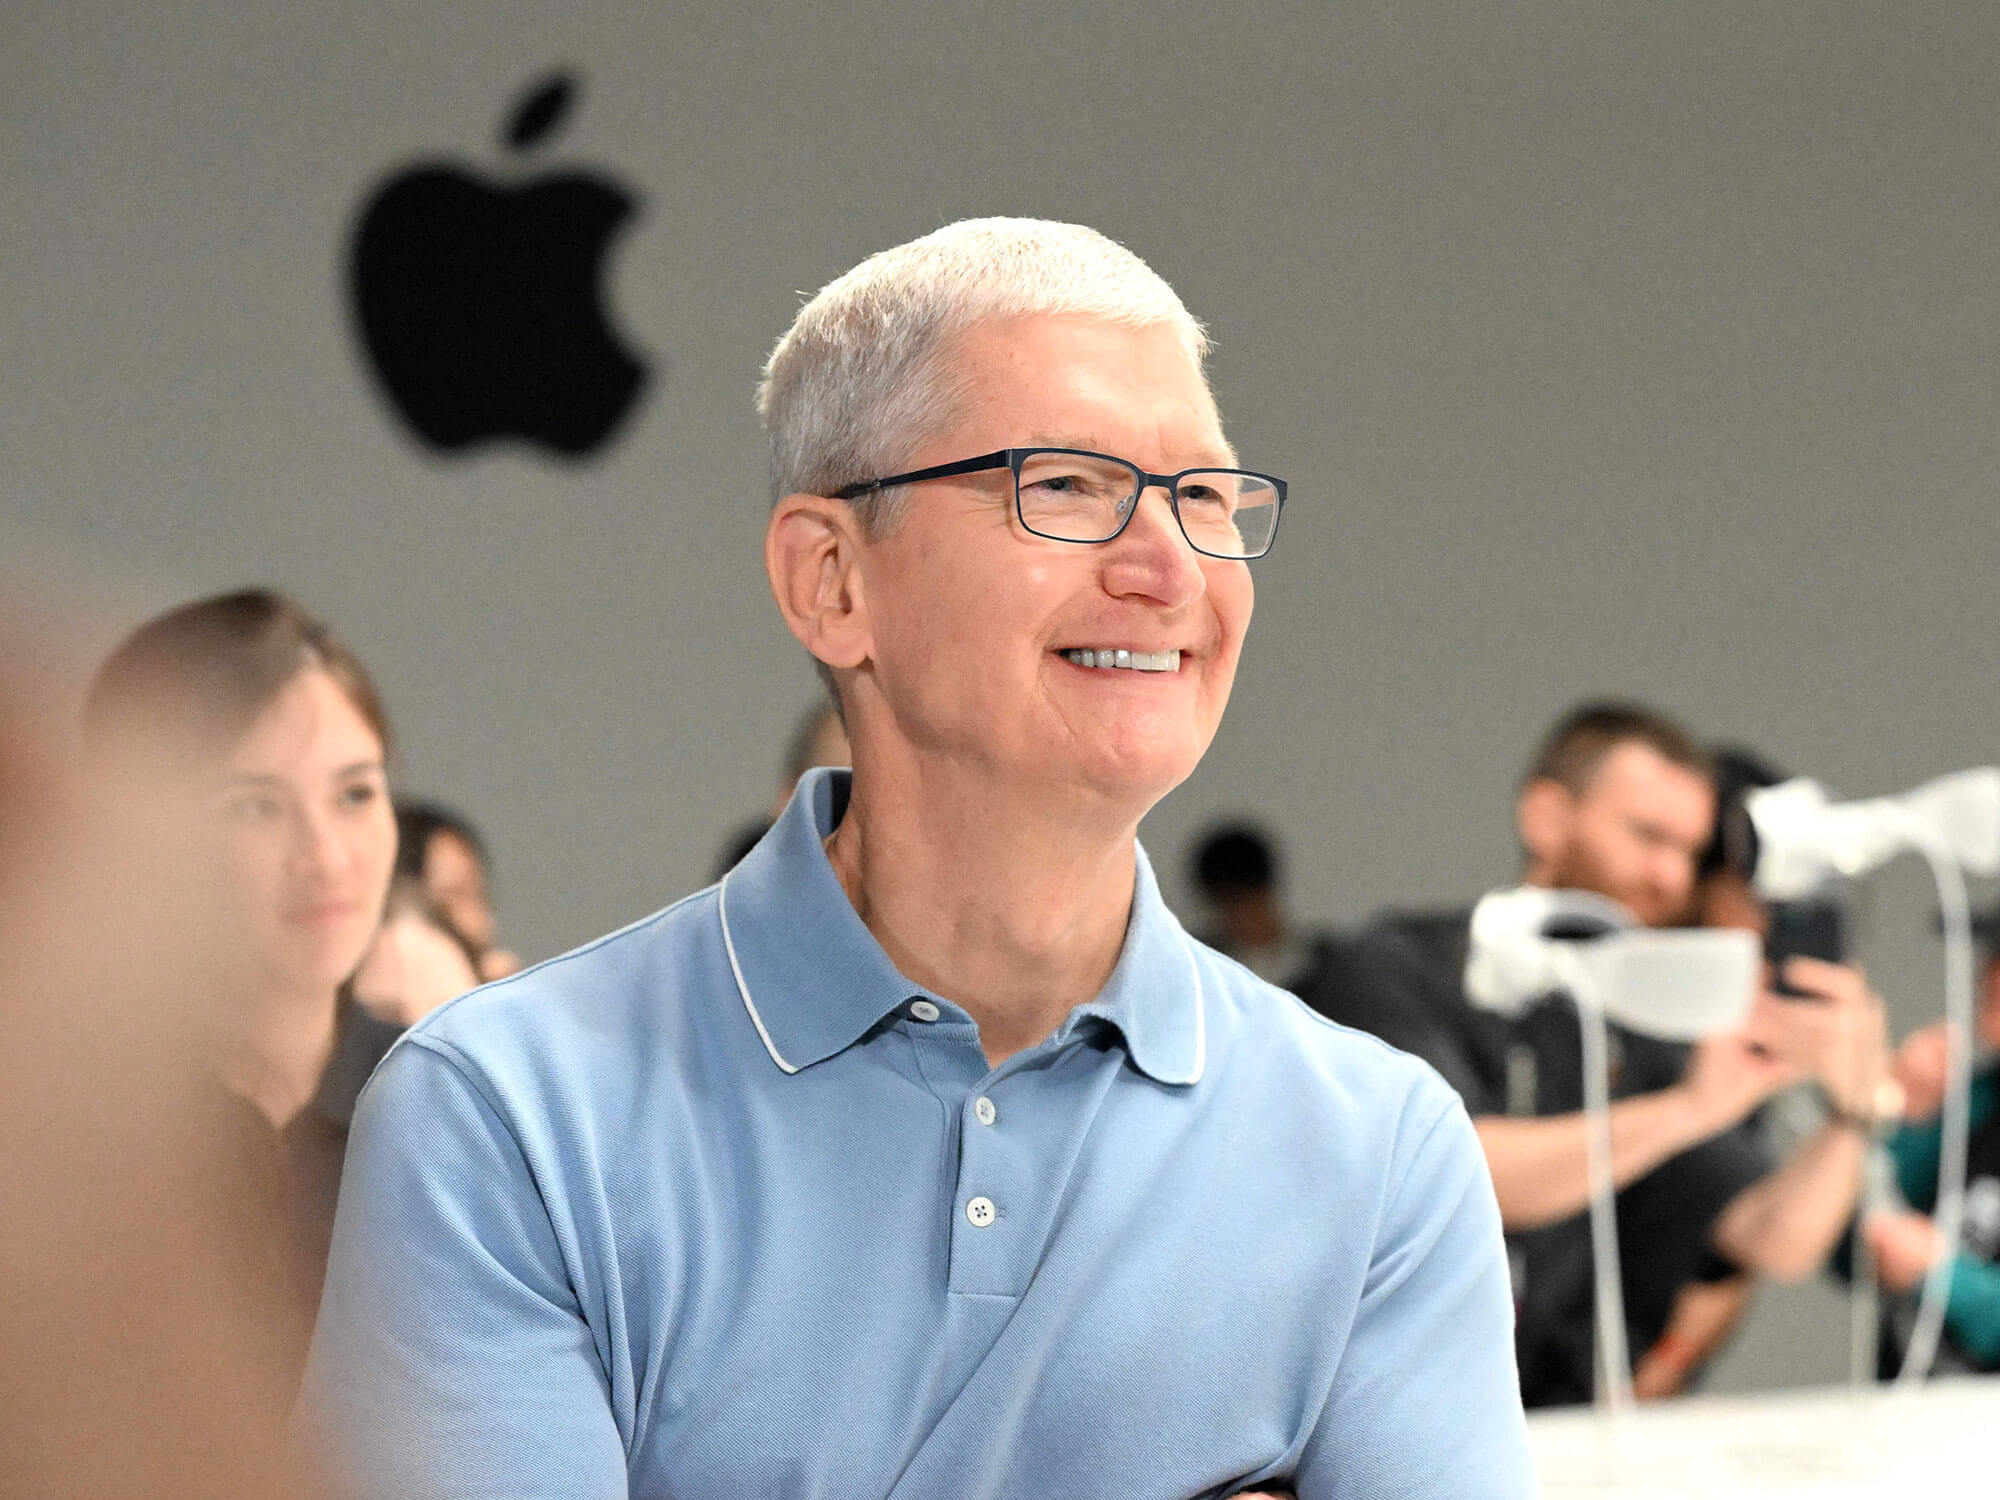 Tim Cook at WWDC23